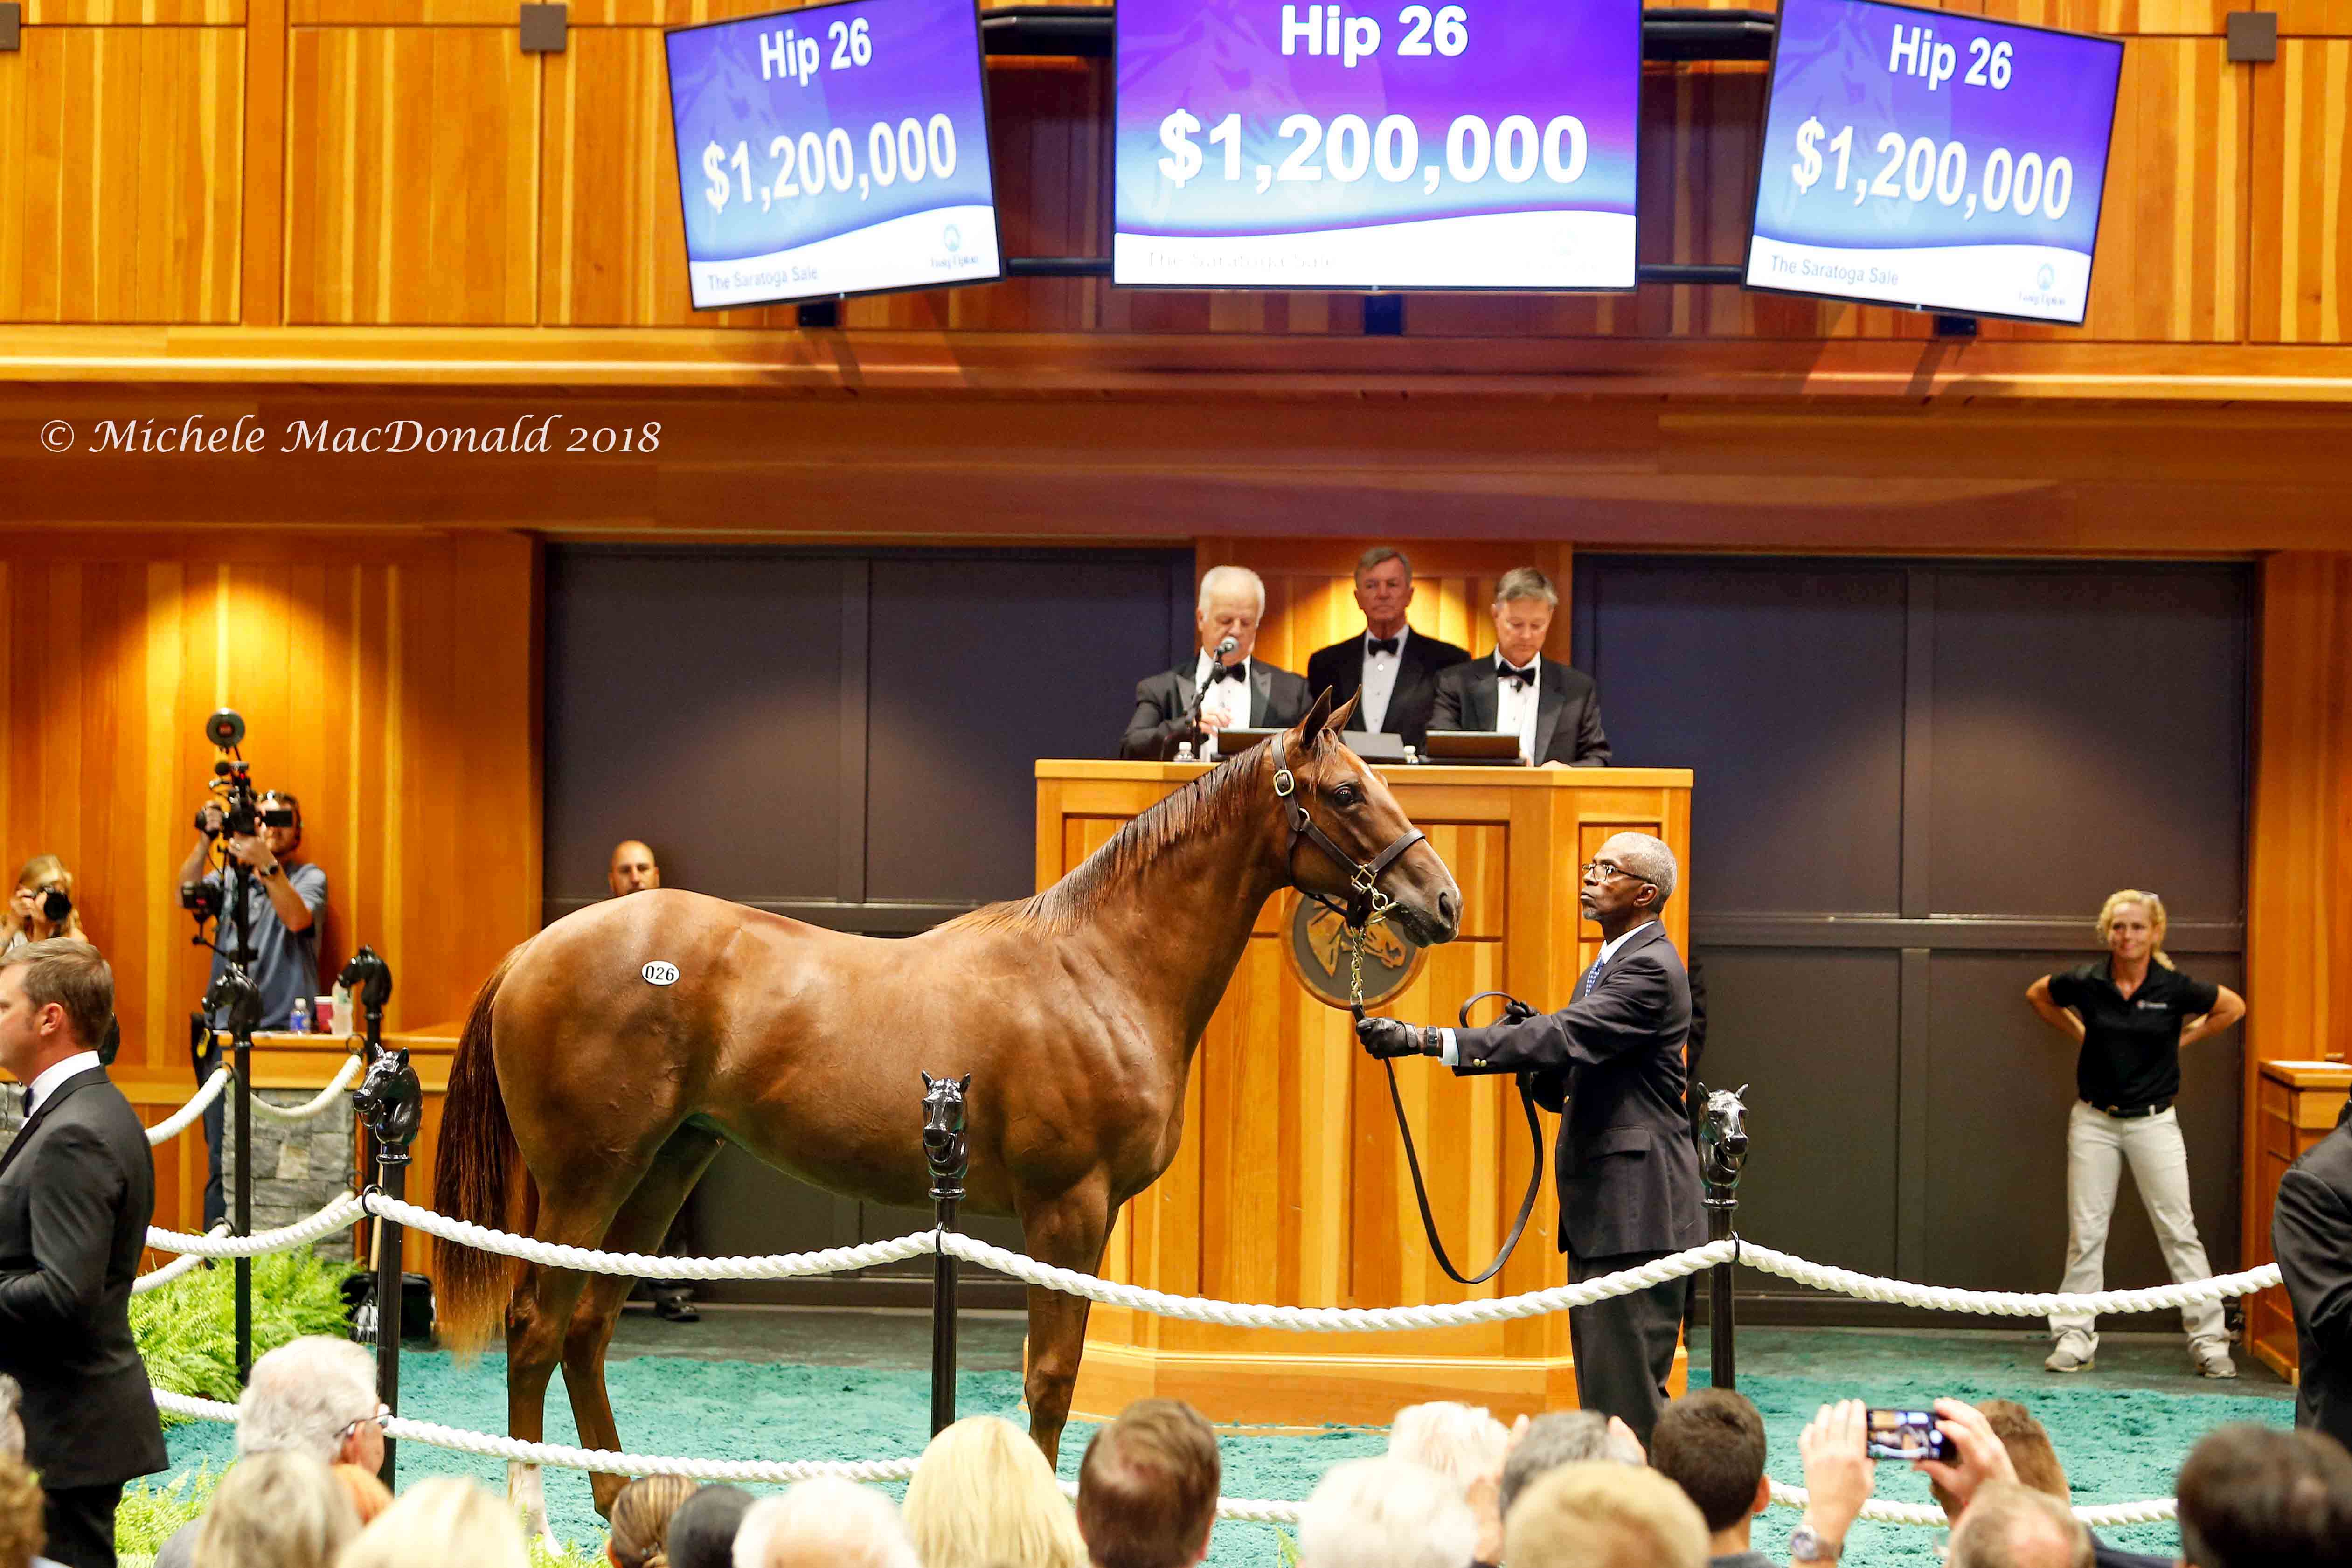 This American Pharoah filly out of Life At Ten was bought by Gainesway’s Brian Graves as a weanling last November. She is pictured being resold for $1.2 million at the Fasig-Tipton Saratoga sale in August. Photo: Michele MacDonald